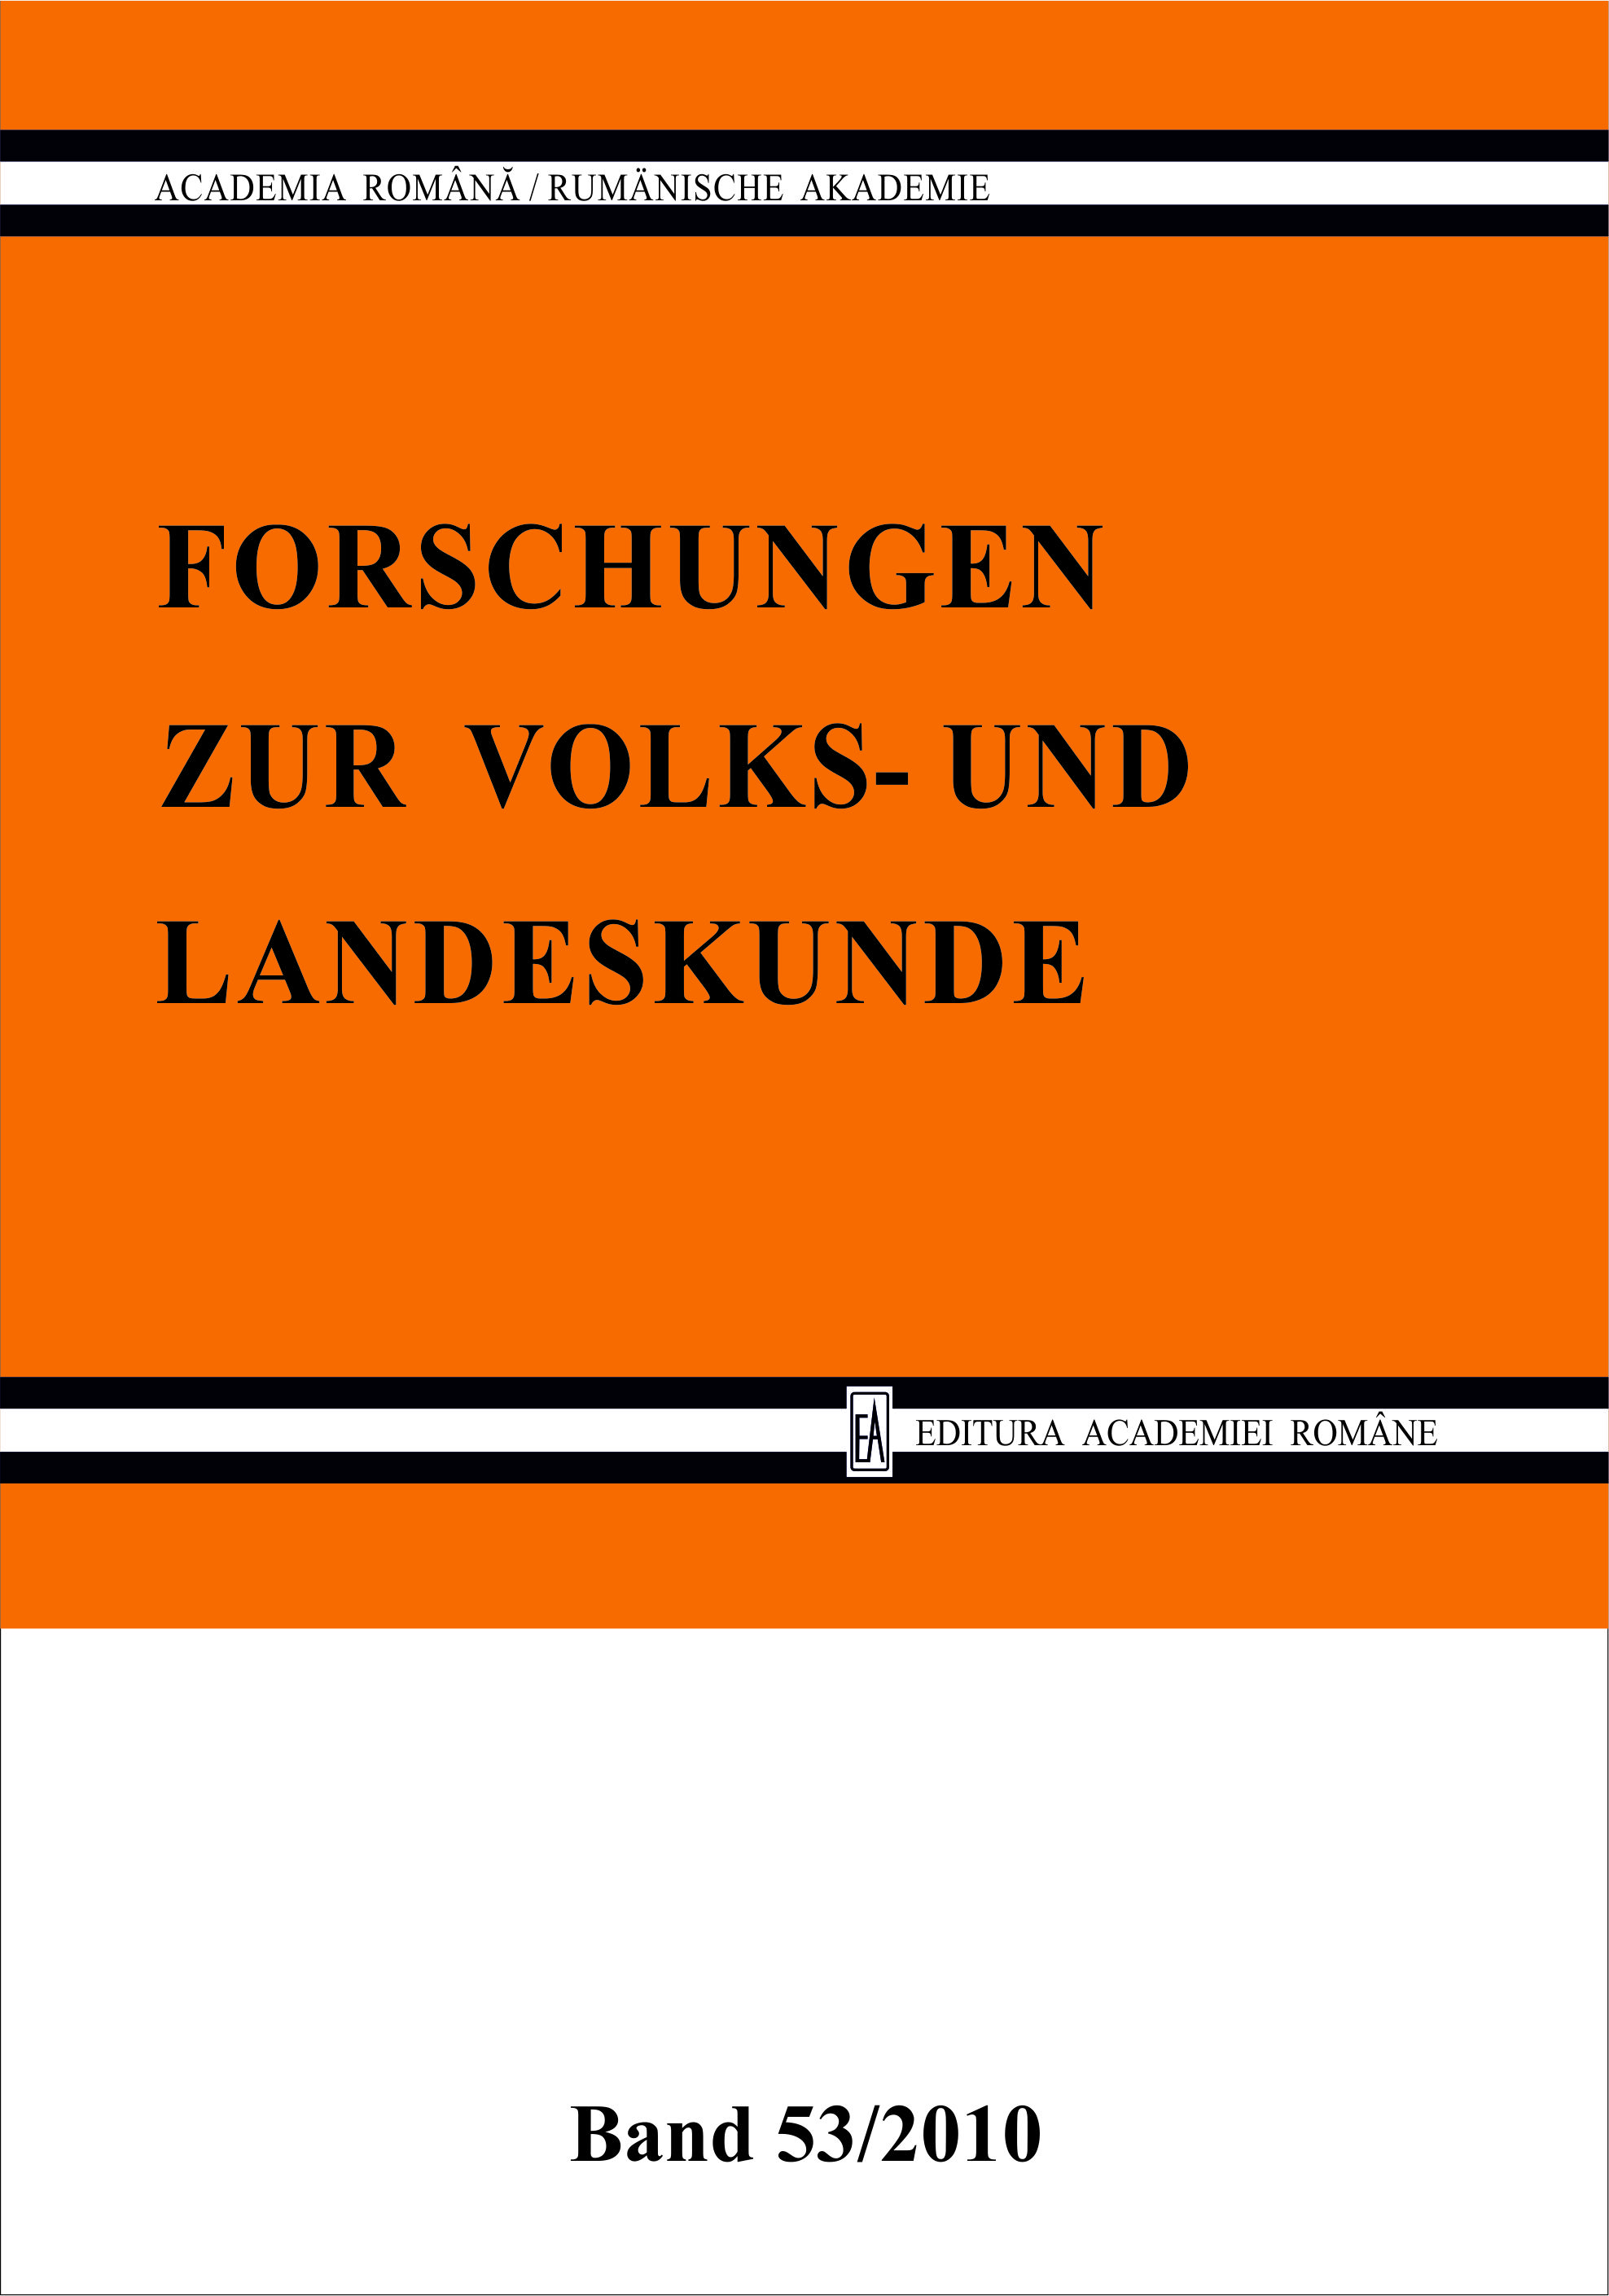 Harald Krasser – a Collaborator of the Academy Institute in Sibiu and of the Journal “Forschungen zur Volks- und Landeskunde” Cover Image